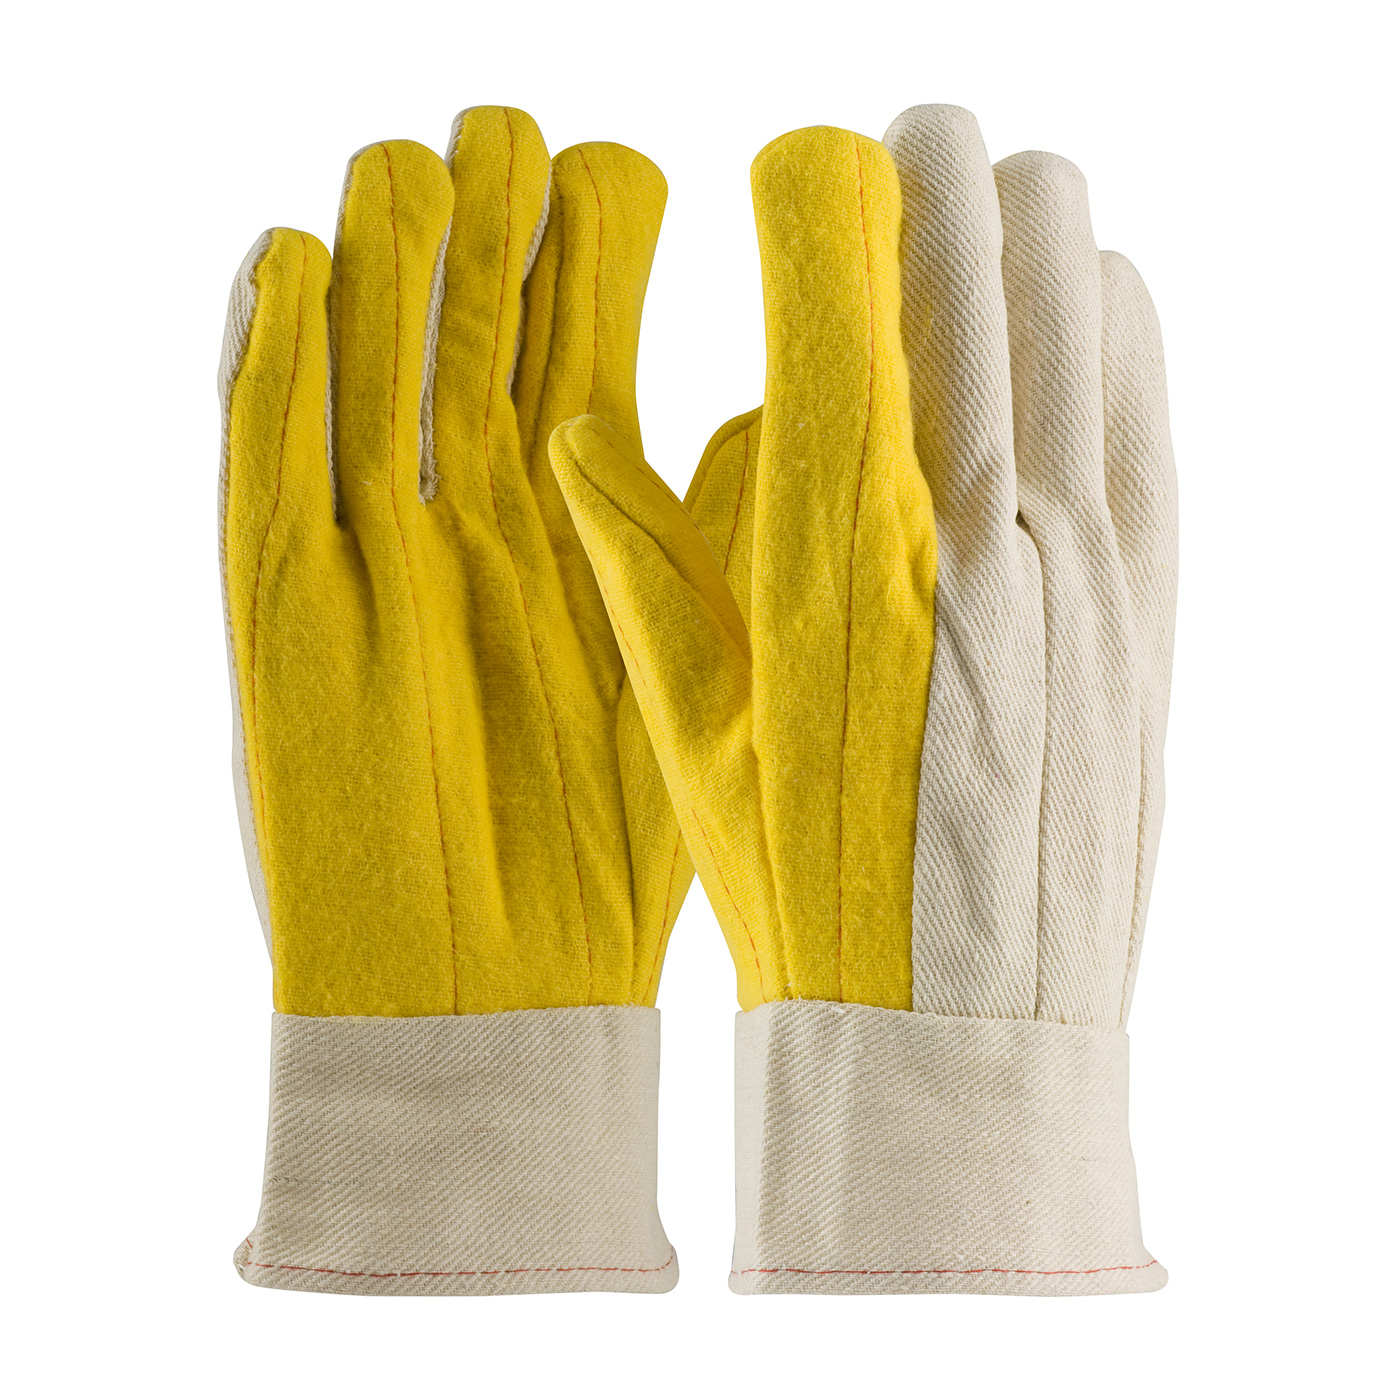 PIP Gold Premium Grade Double Layer Nap-out Finish Cotton Chore Gloves - Band Top